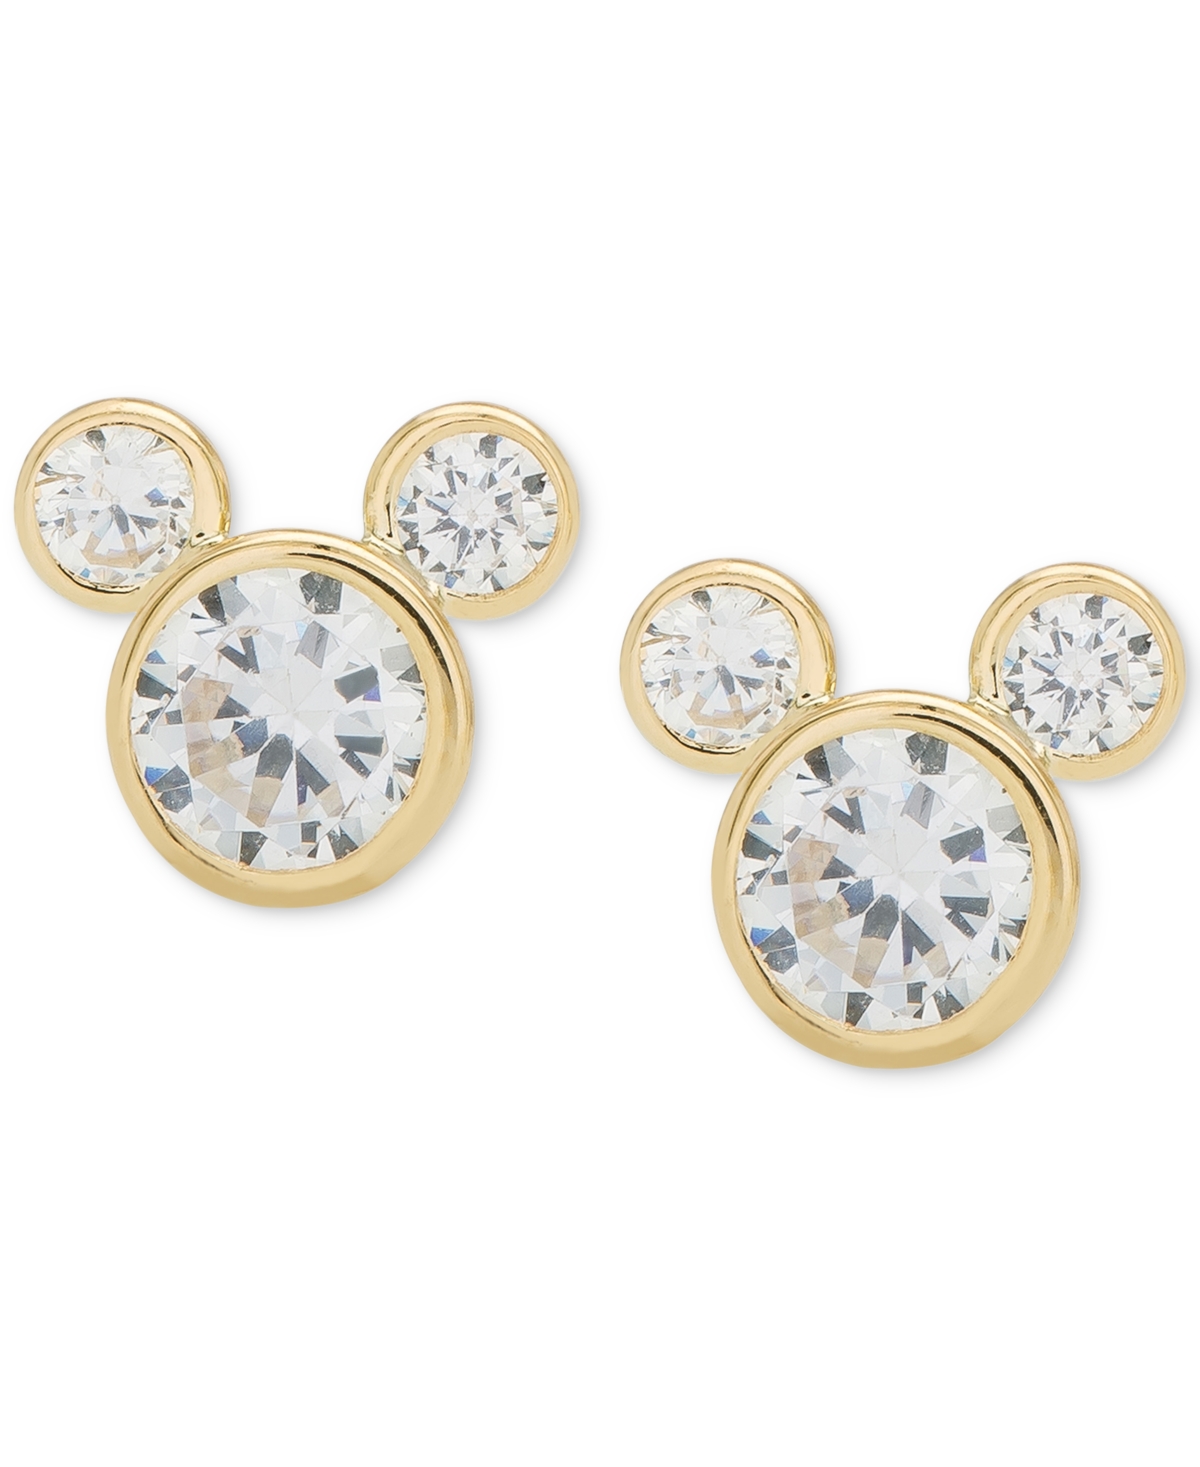 Children's Cubic Zirconia Mickey Mouse Stud Earrings in 14k Gold - Yellow Gold